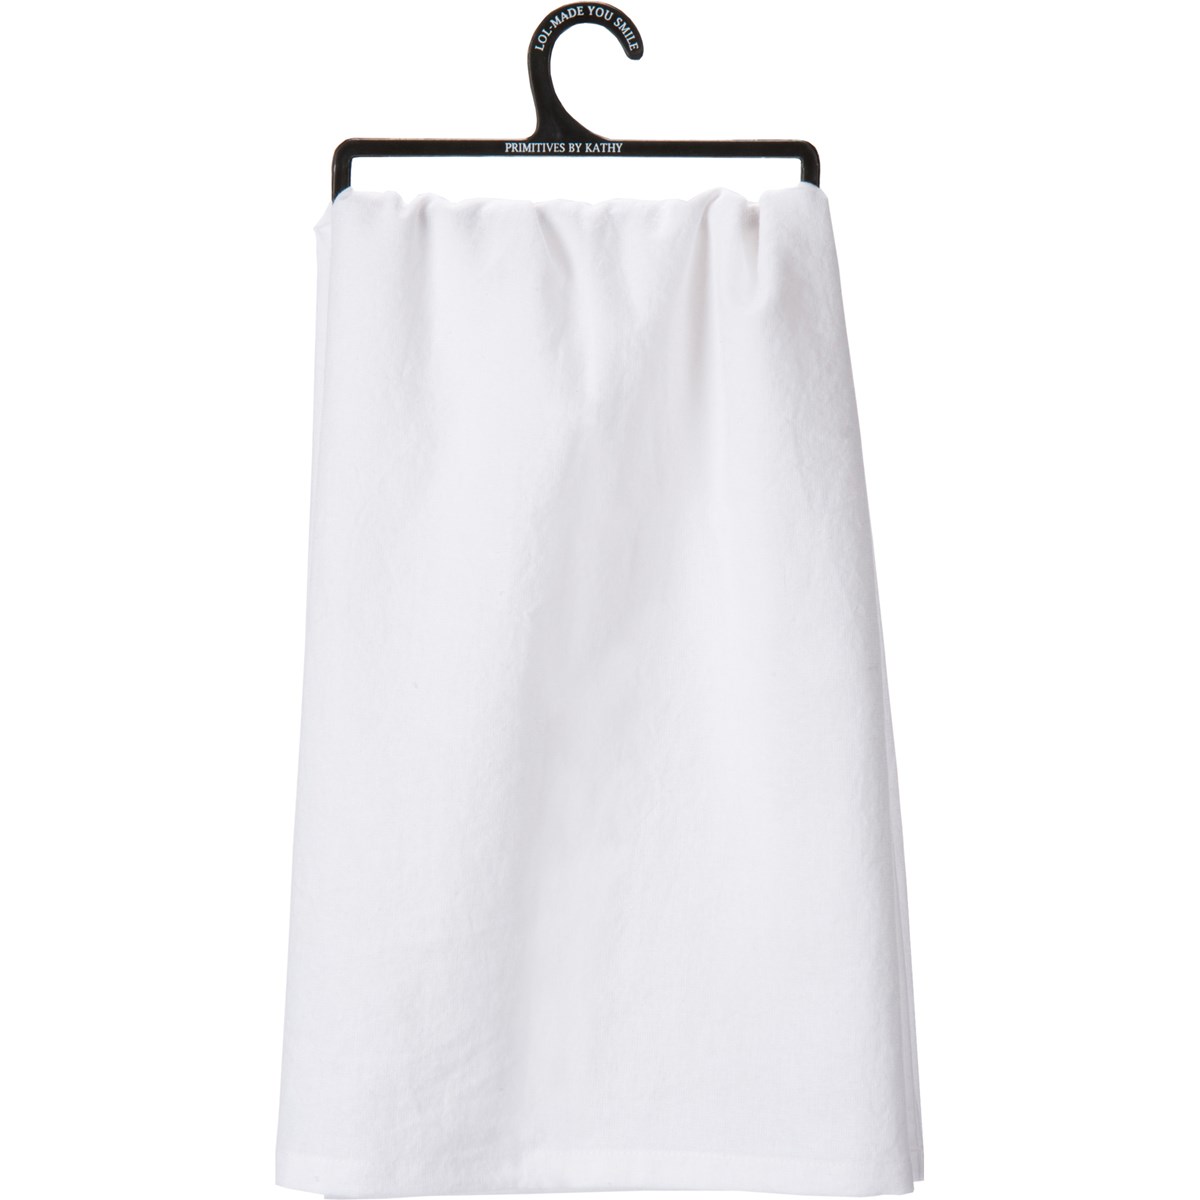 Get To Pretend The Candy Kitchen Towel - Cotton